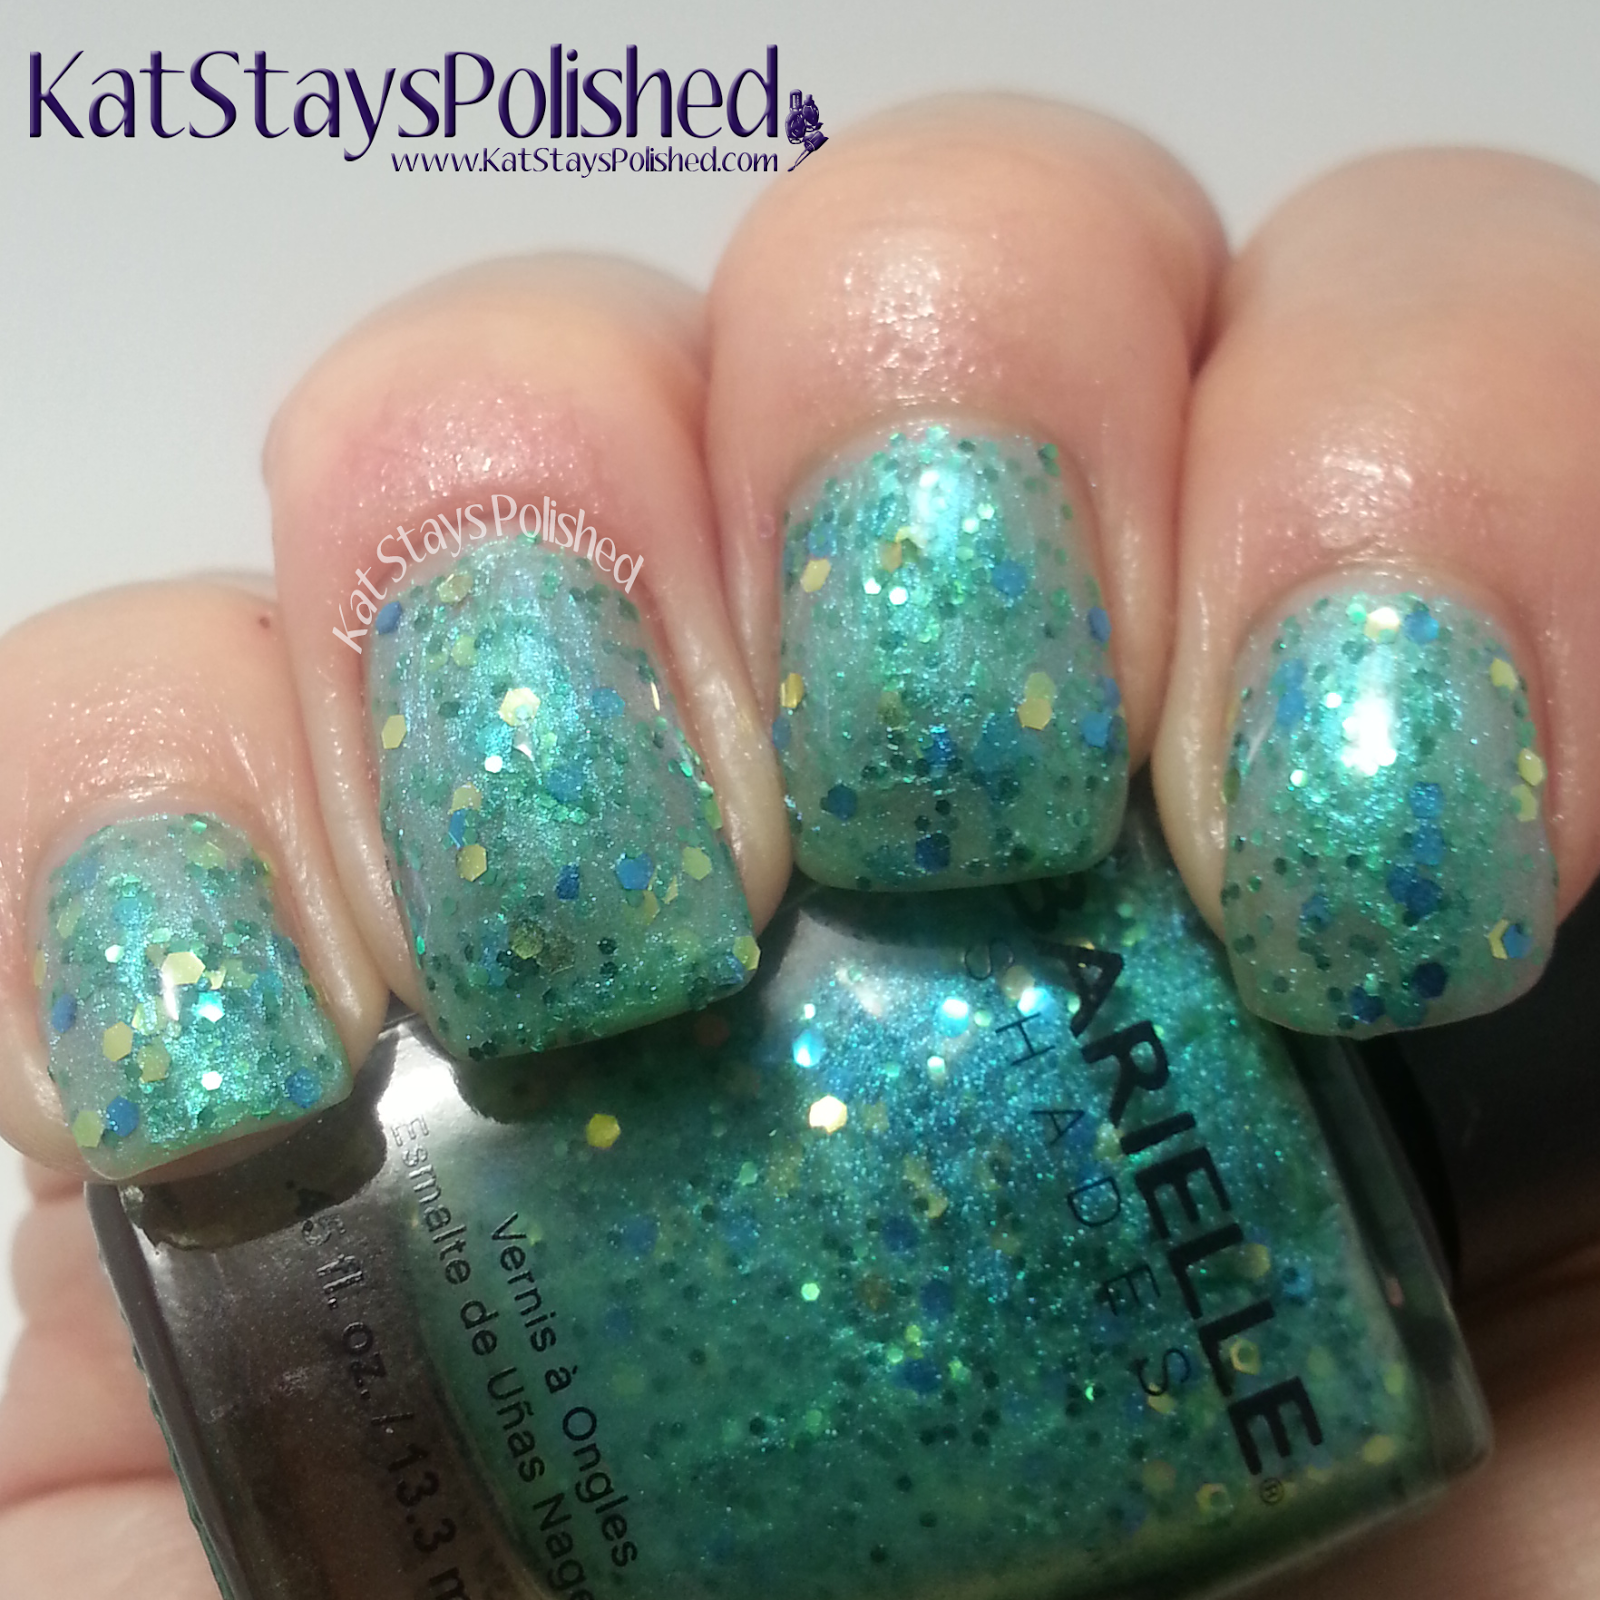 Barielle Bling It On - Sea Urchin | Kat Stays Polished